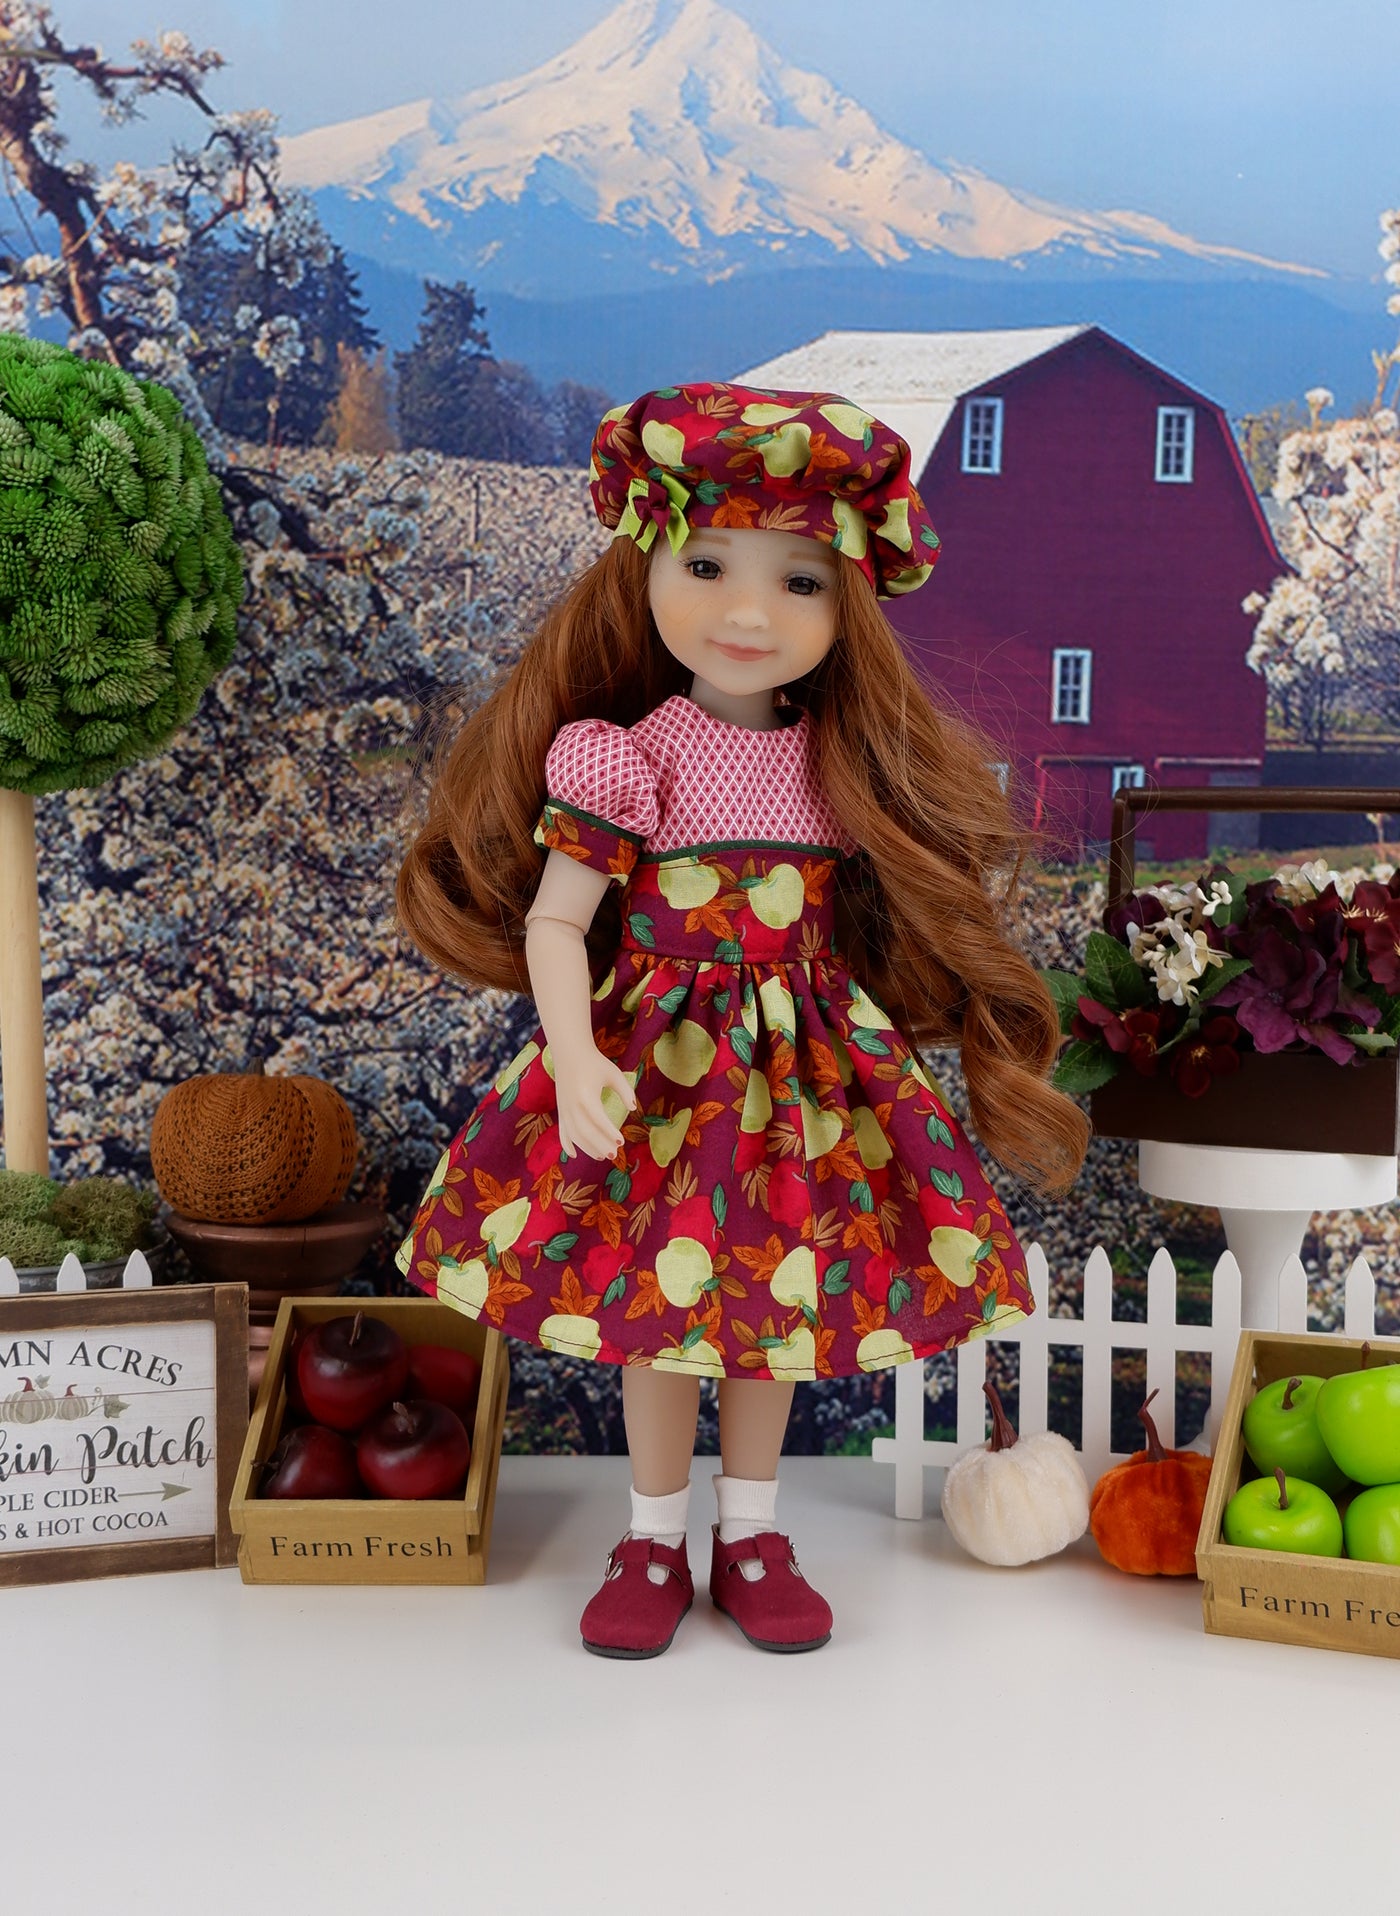 Fall Apples - dress and shoes for Ruby Red Fashion Friends doll